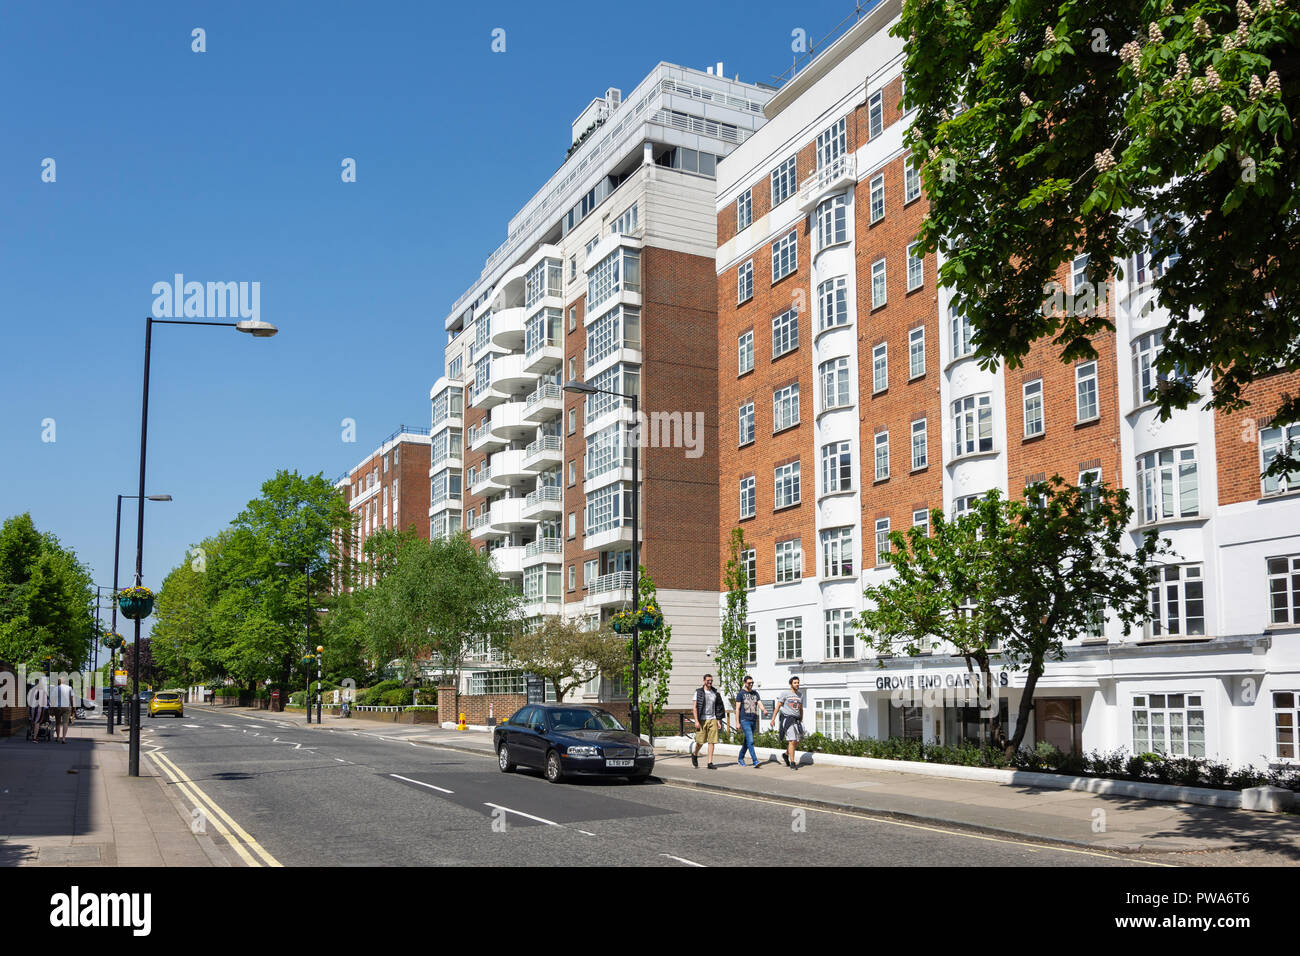 Grove End Gardens apartments, Abbey Road, St John's Wood, City of Westminster, Greater London, England, United Kingdom Stock Photo